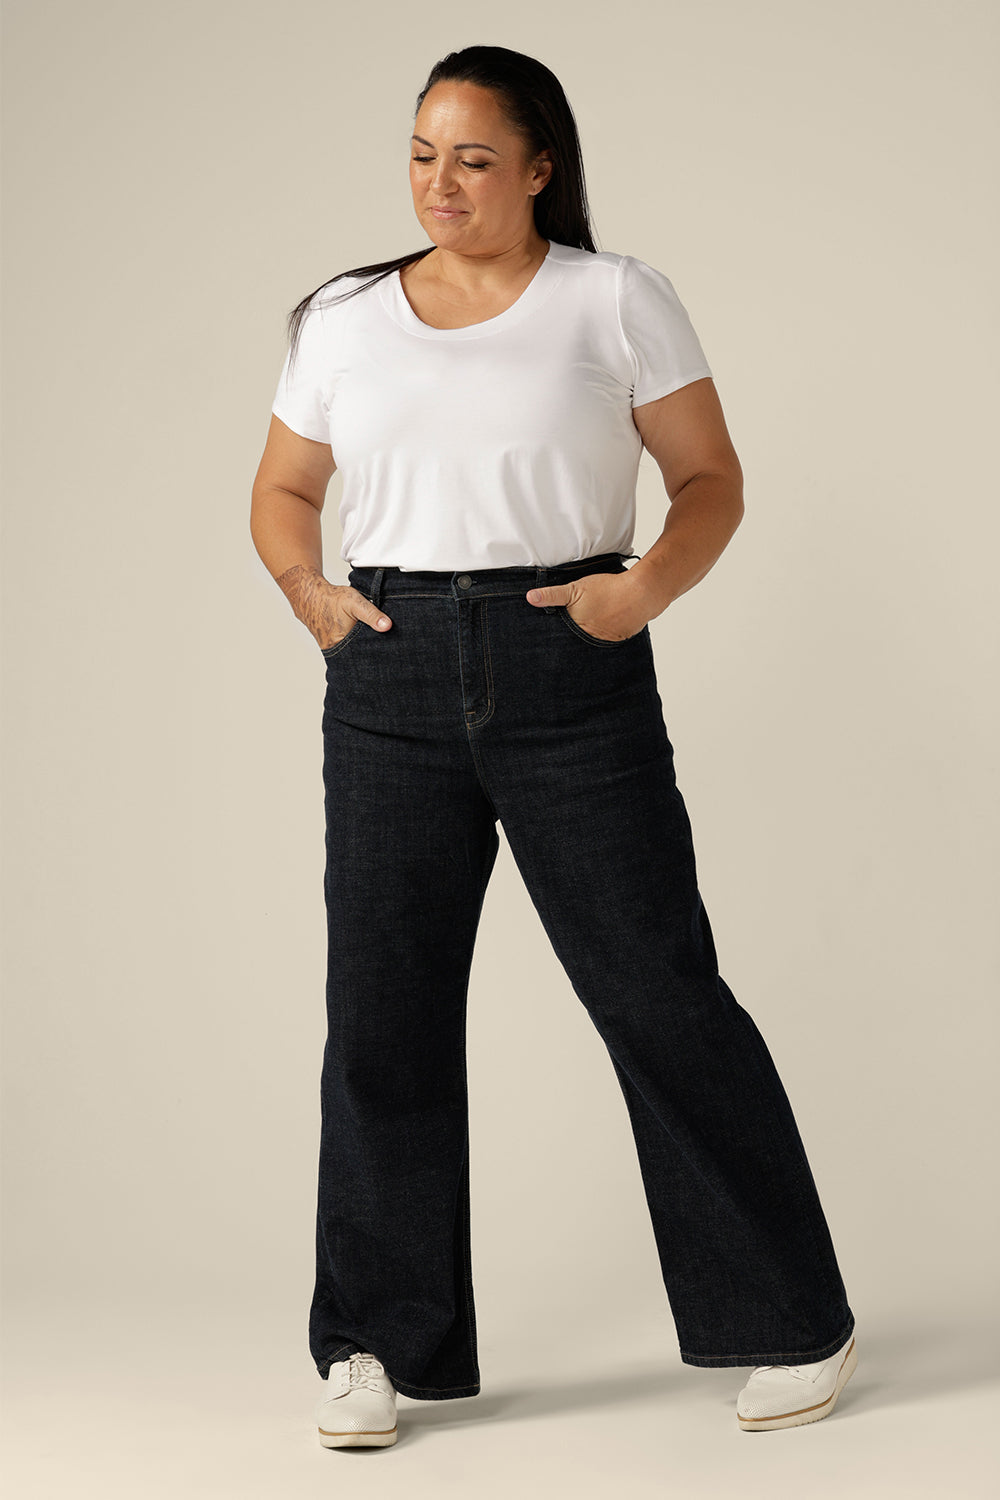 Ethical and sustainable jeans made for women in sizes 8 to 24, these jeans are high-waisted, with flared legs. Worn here in a size 16, these conscious jeans by Australian and New Zealand women's clothing brand, L&F are tailored to fit women's curves.